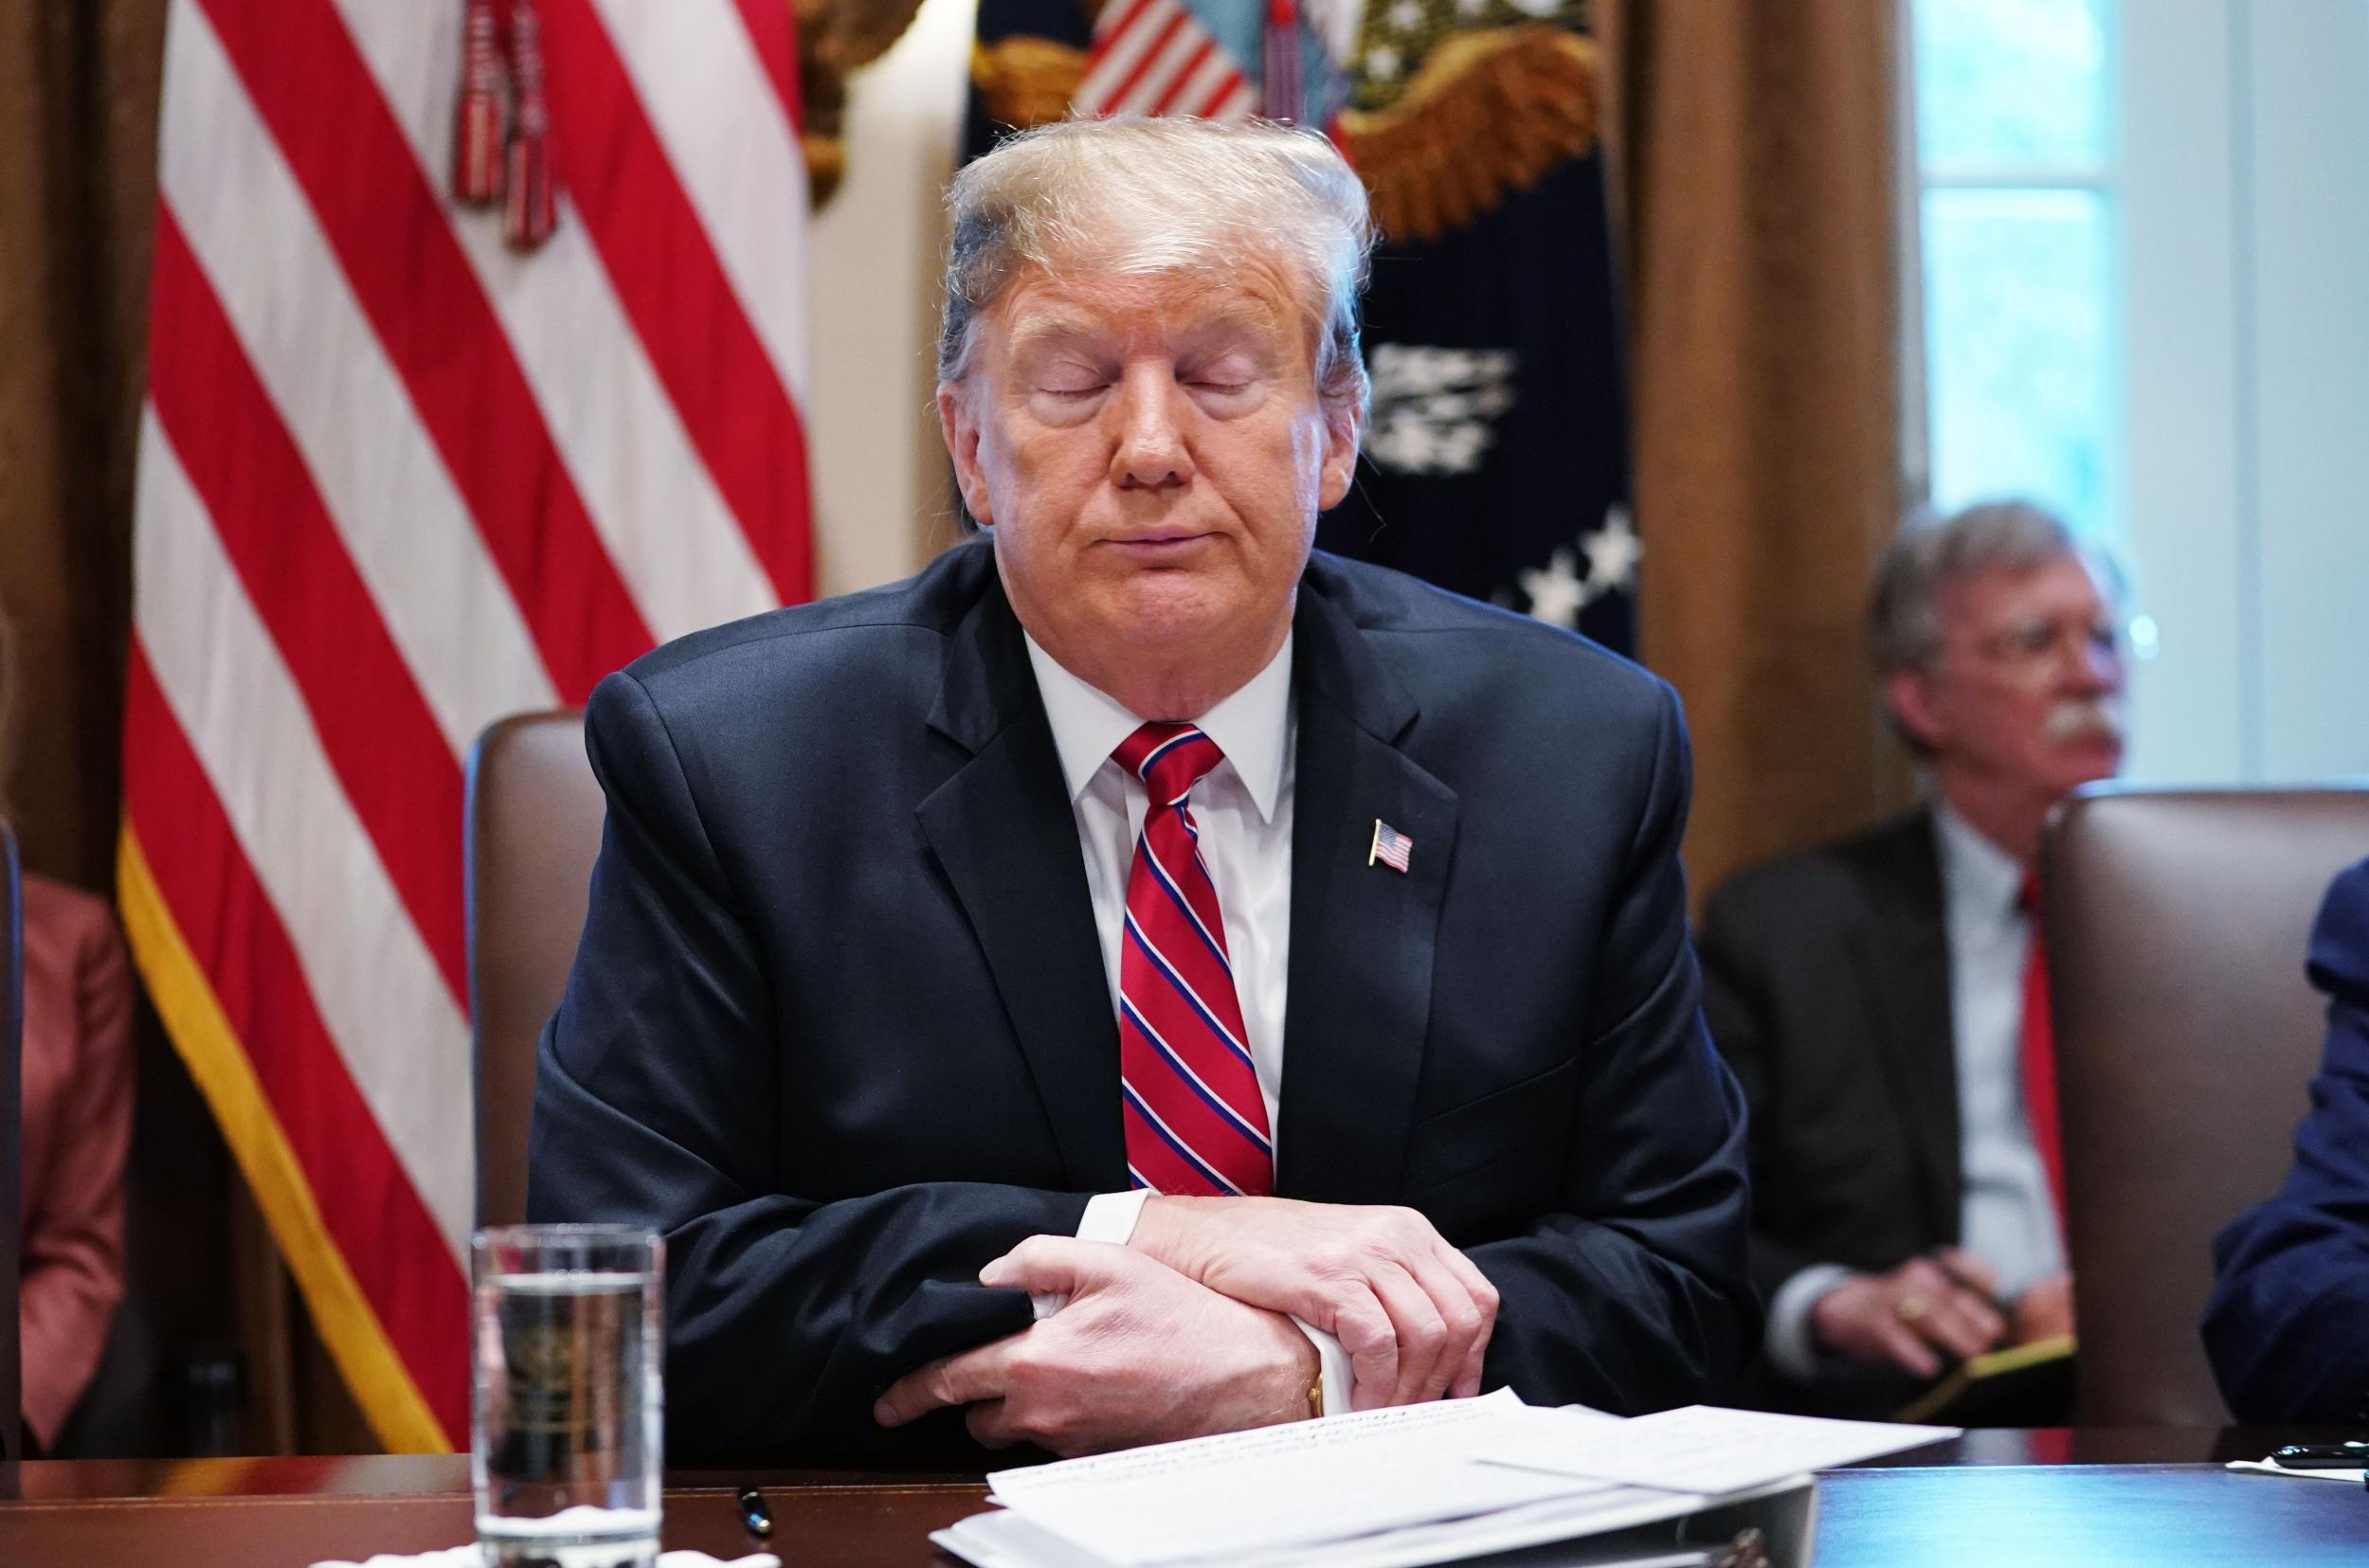 Trump releases financial disclosure statements, revealing he made $479 million in 2018